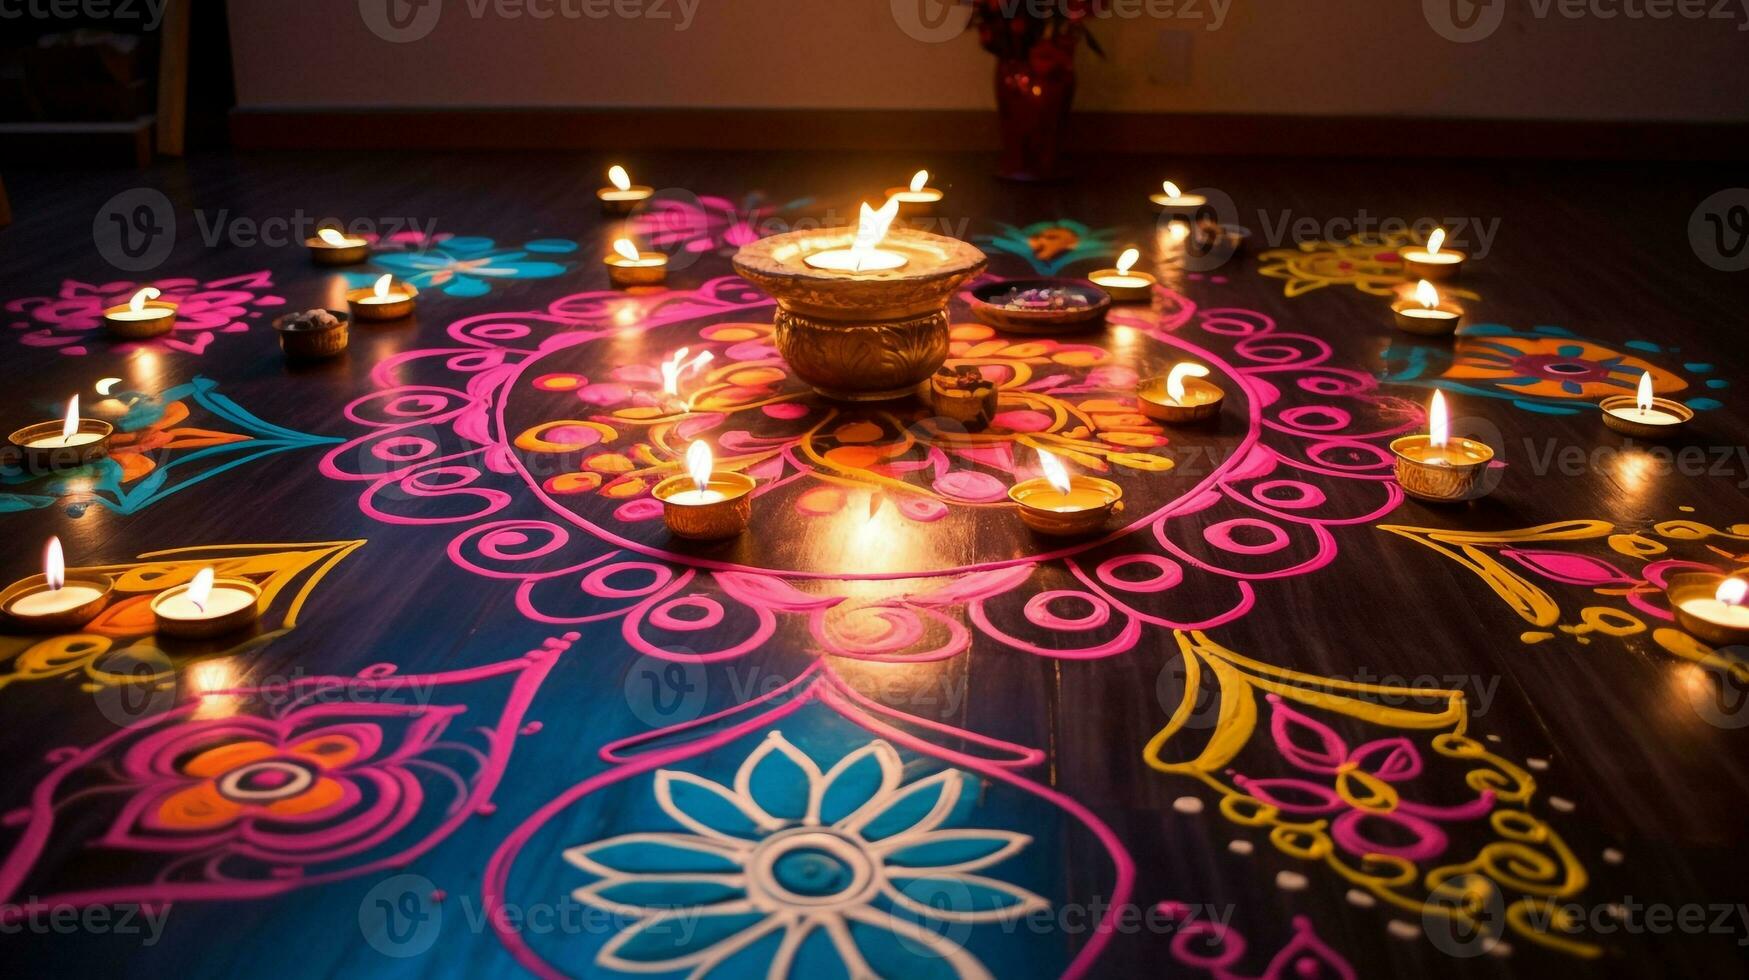 Colorful rangoli designs with candles on the floor, diwali stock images, realistic stock photos